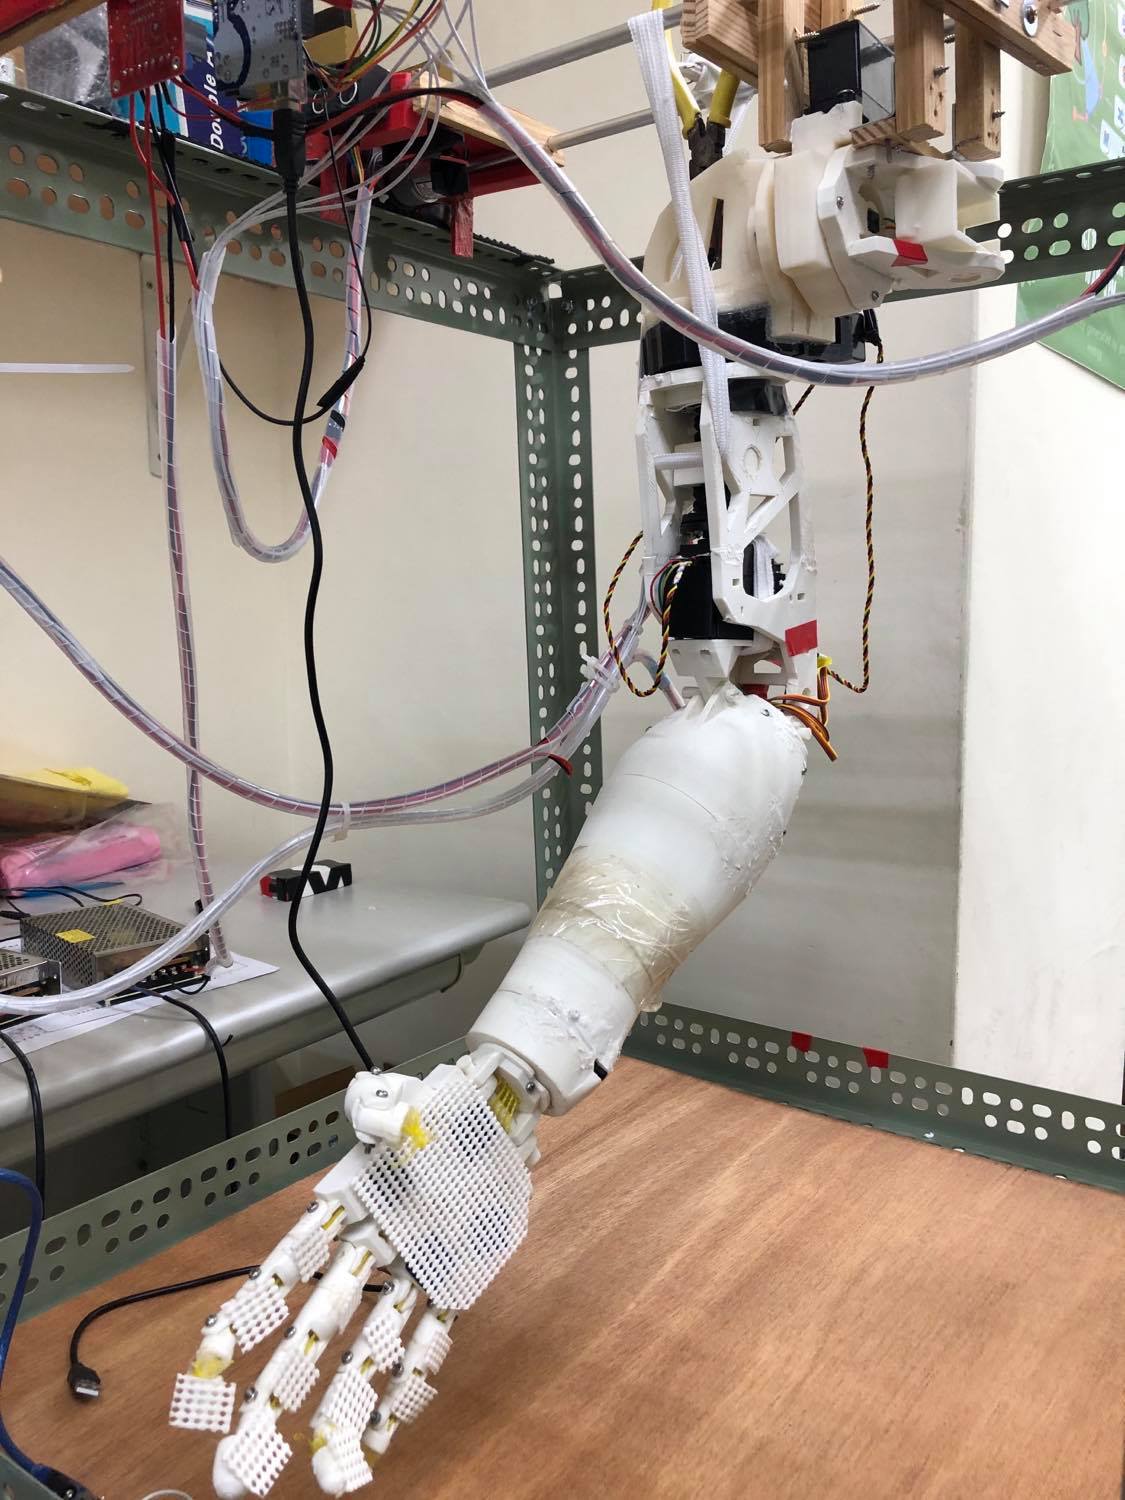 The Control Development of Humanoid Robotic Arm Based on Deep Learning